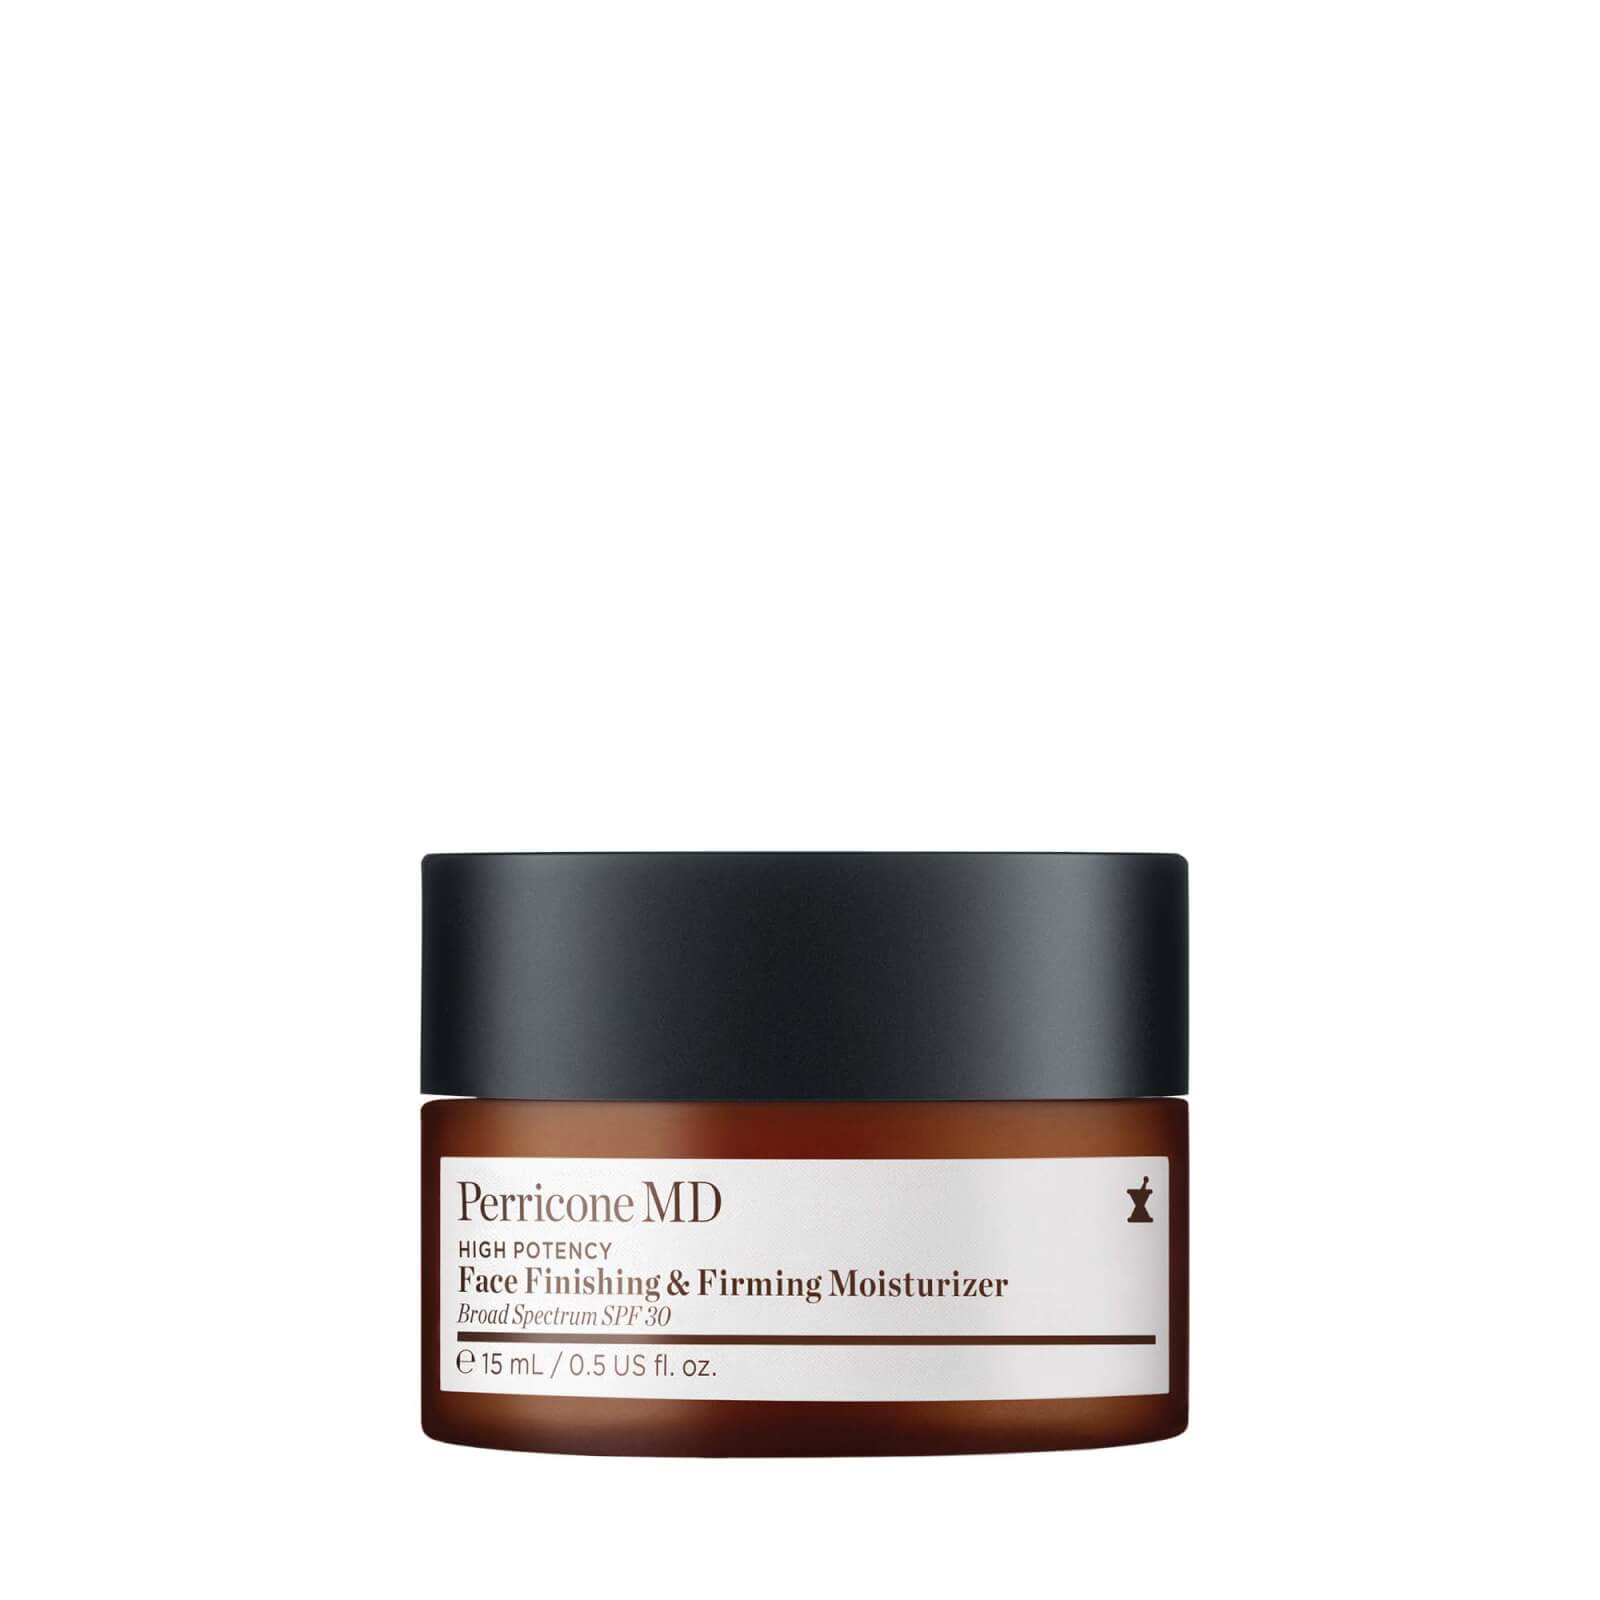 Perricone Md High Potency Face Finishing & Firming Moisturizer Spf 30